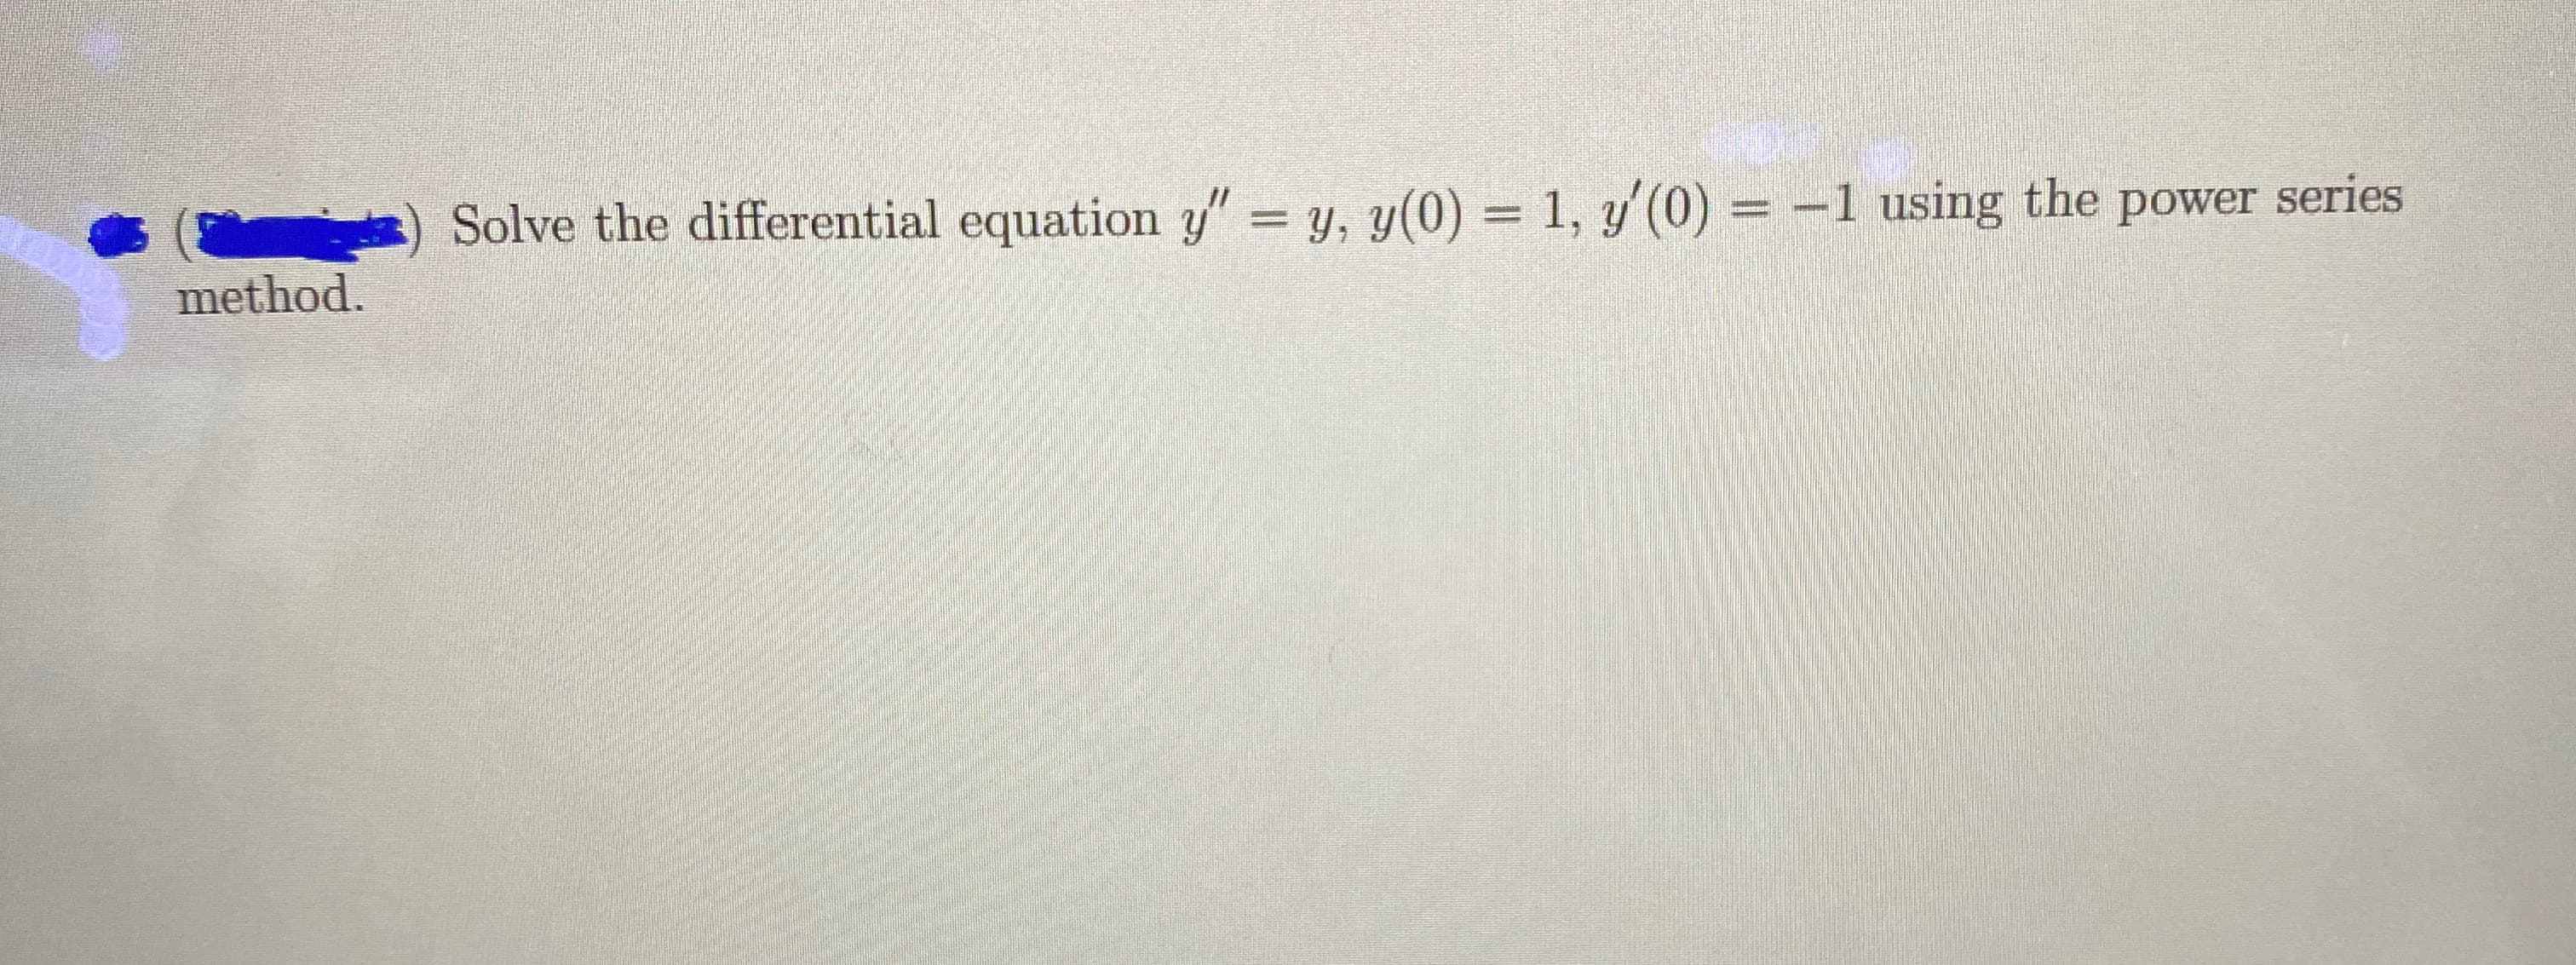 Solve the differential equation y" = y, y(0) = 1, y'(0) = -1 using the power series
